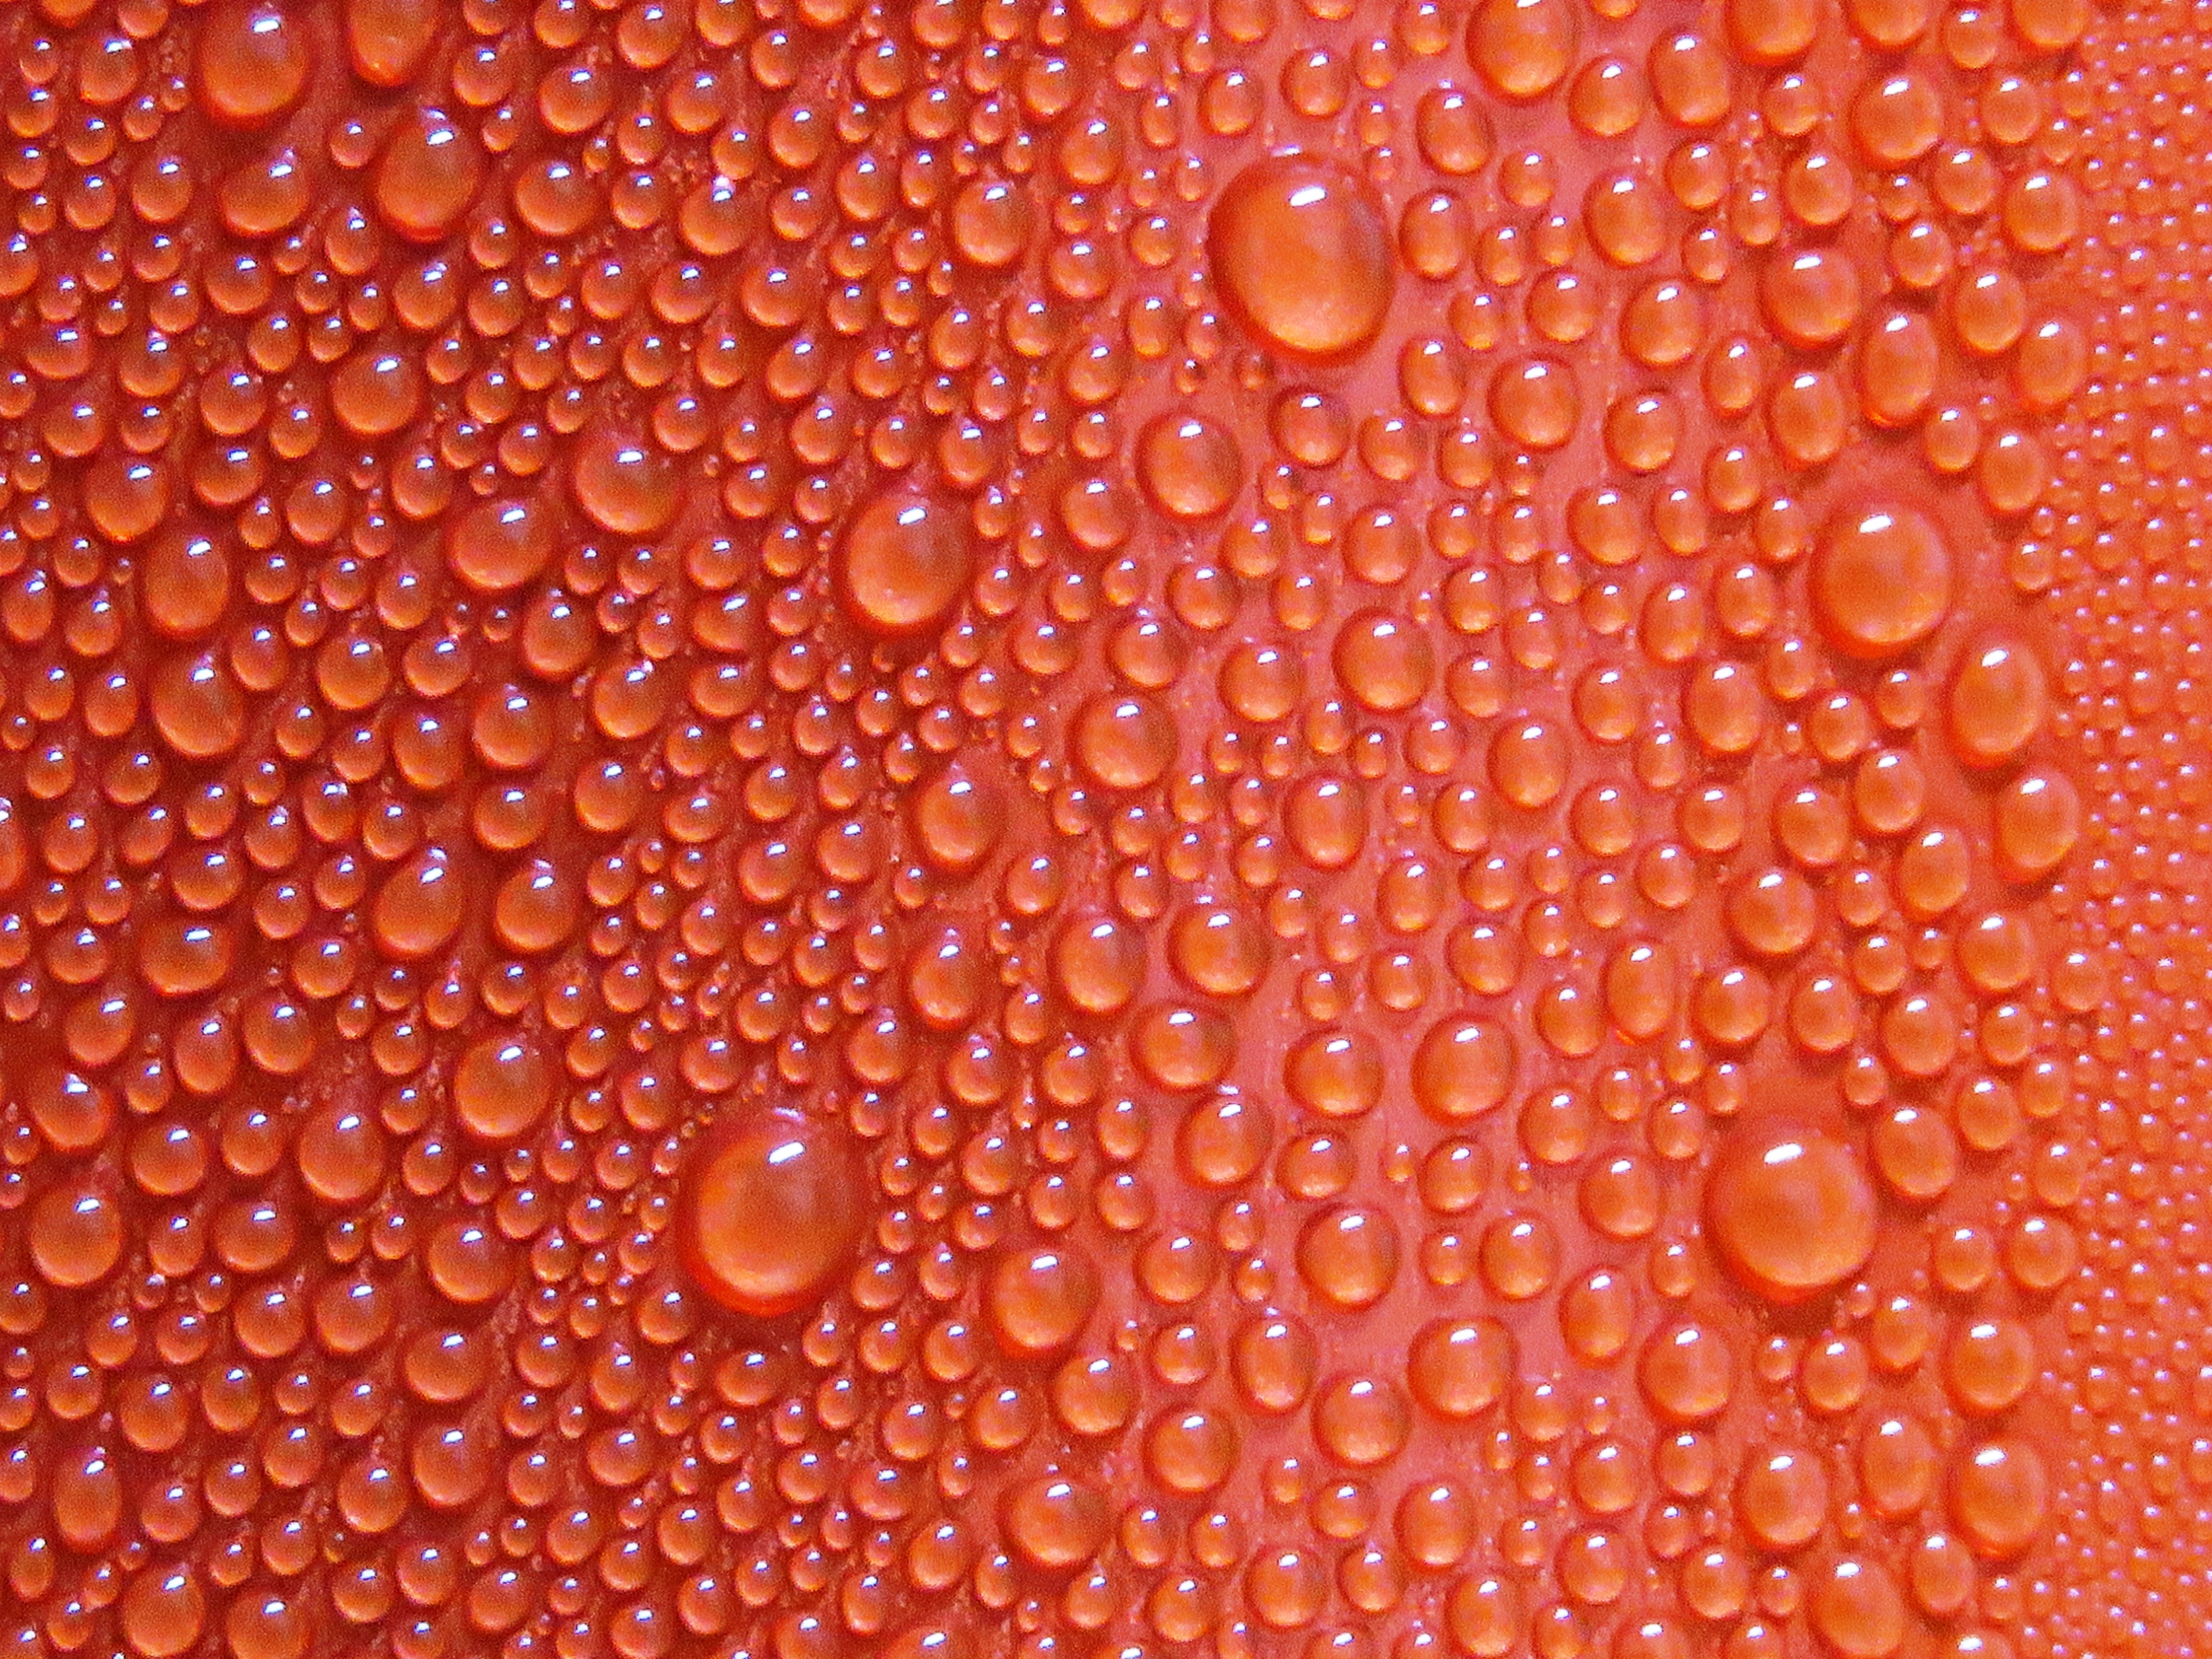 drops, textures, texture, surface lock screen backgrounds